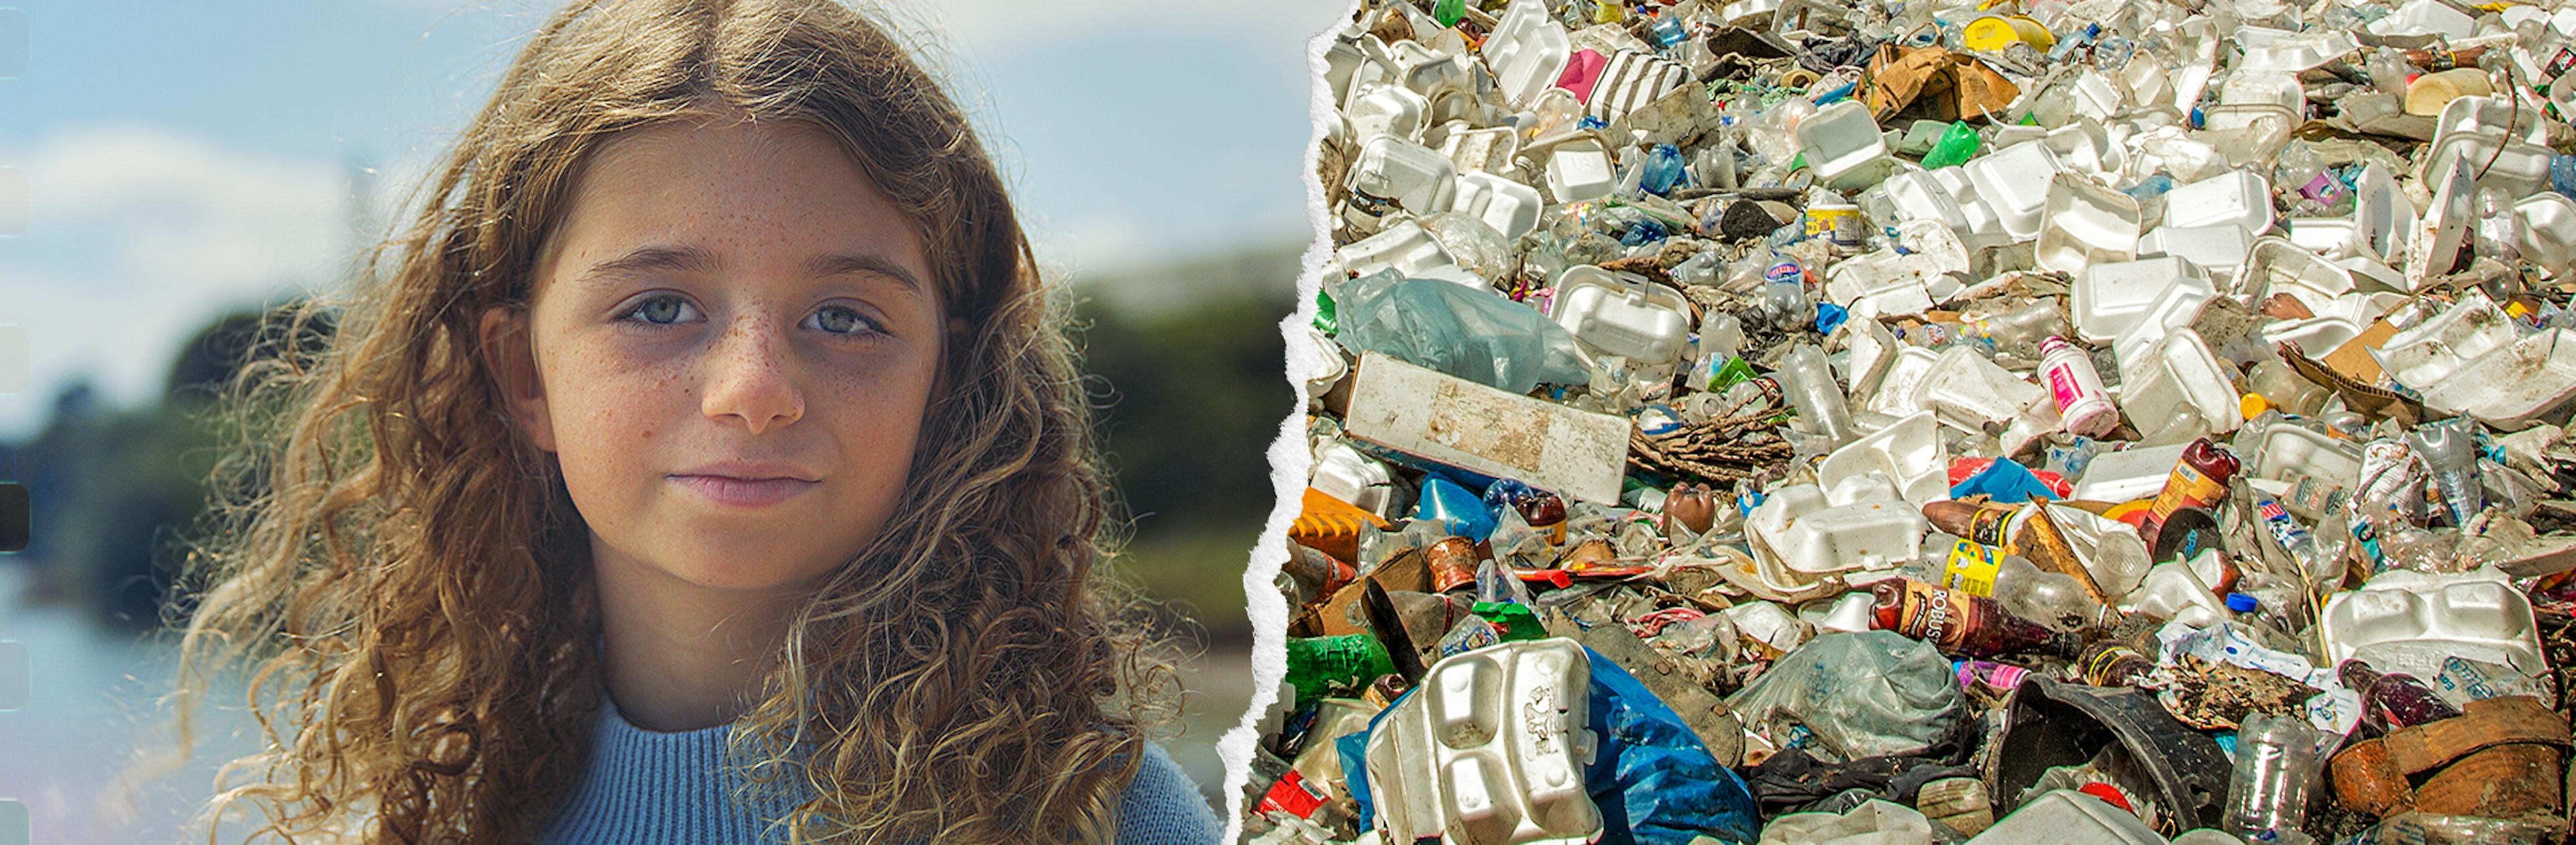 Young girls looks straight ahead with piles of trash on the other side